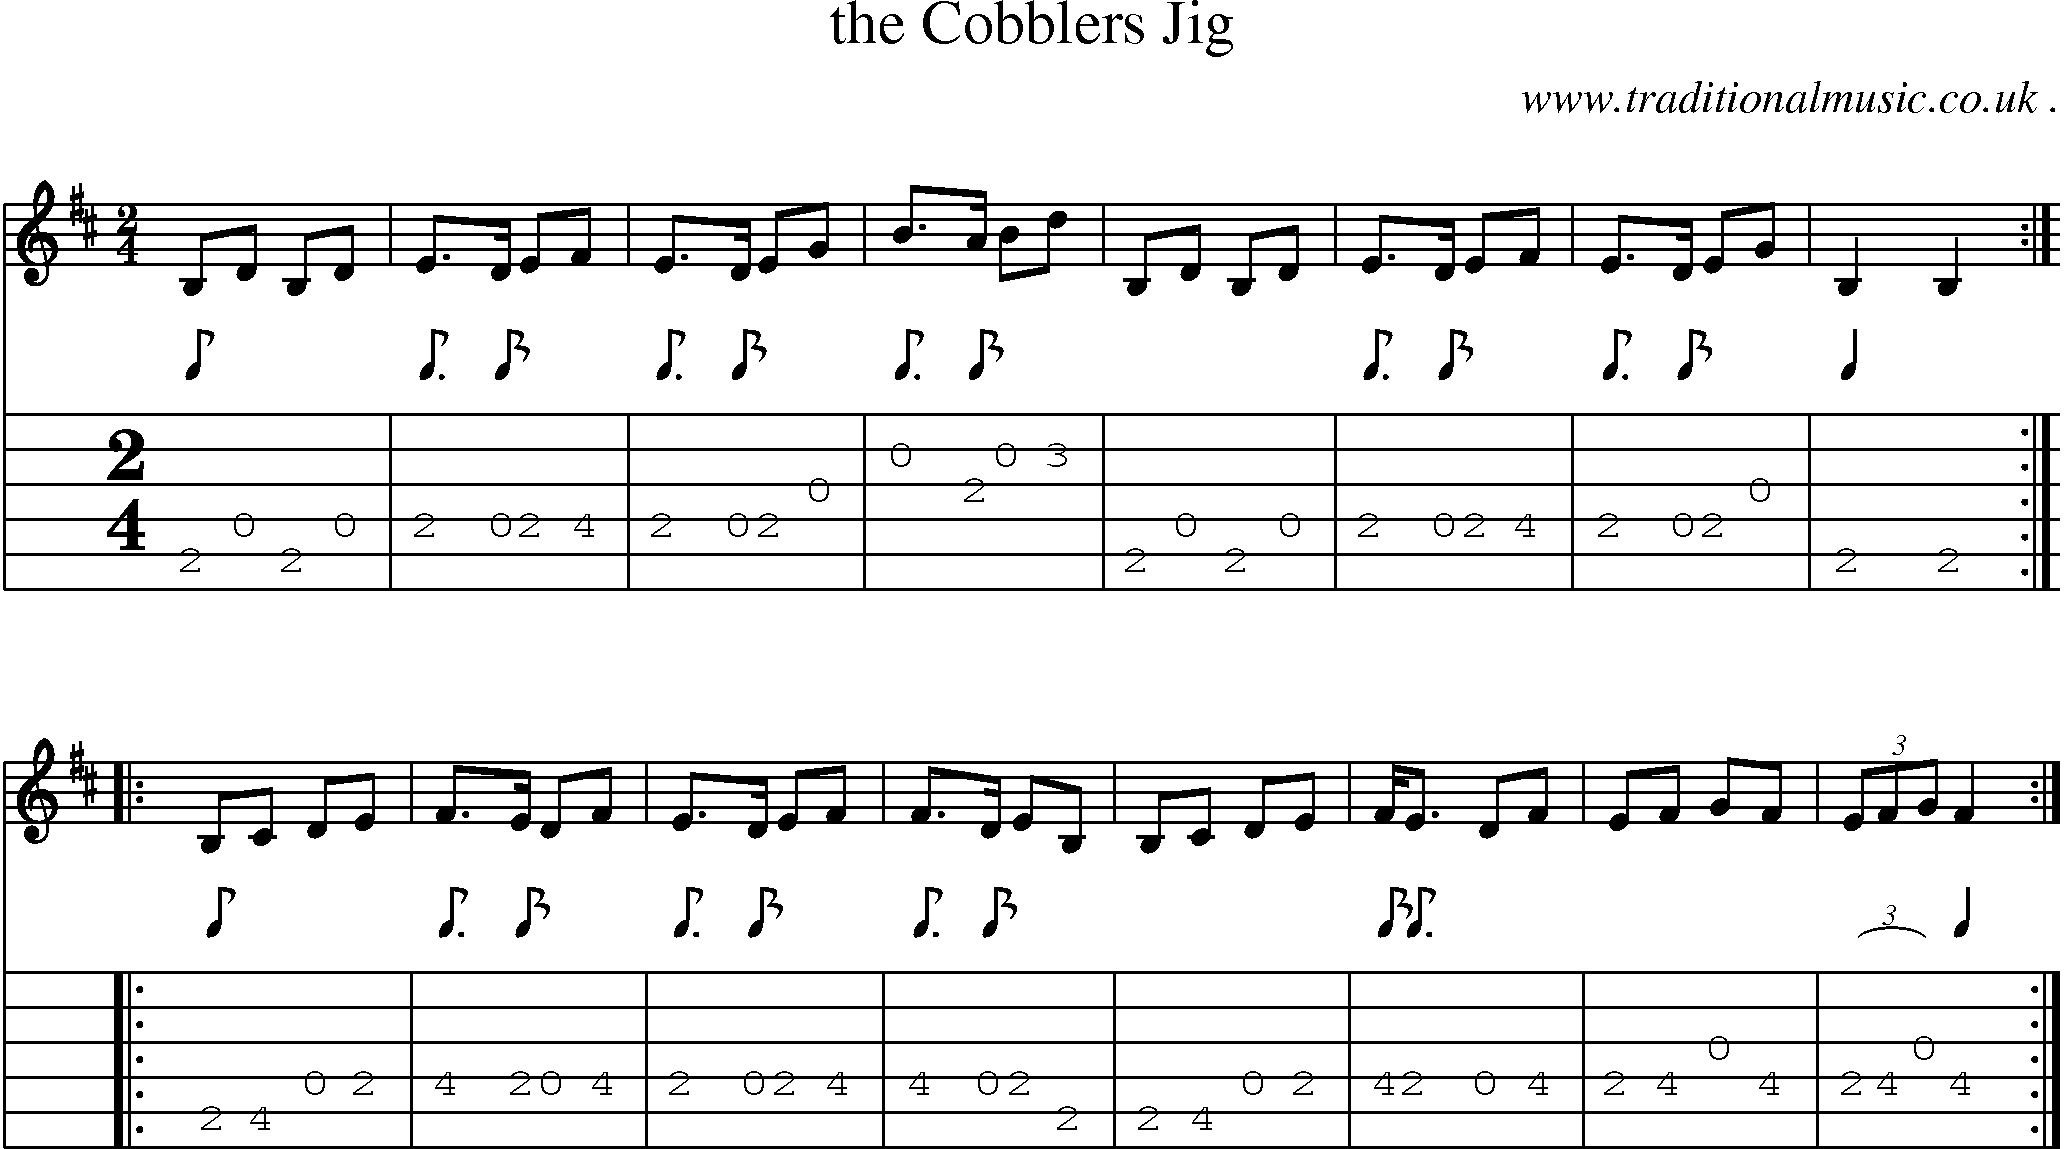 Sheet-Music and Guitar Tabs for The Cobblers Jig